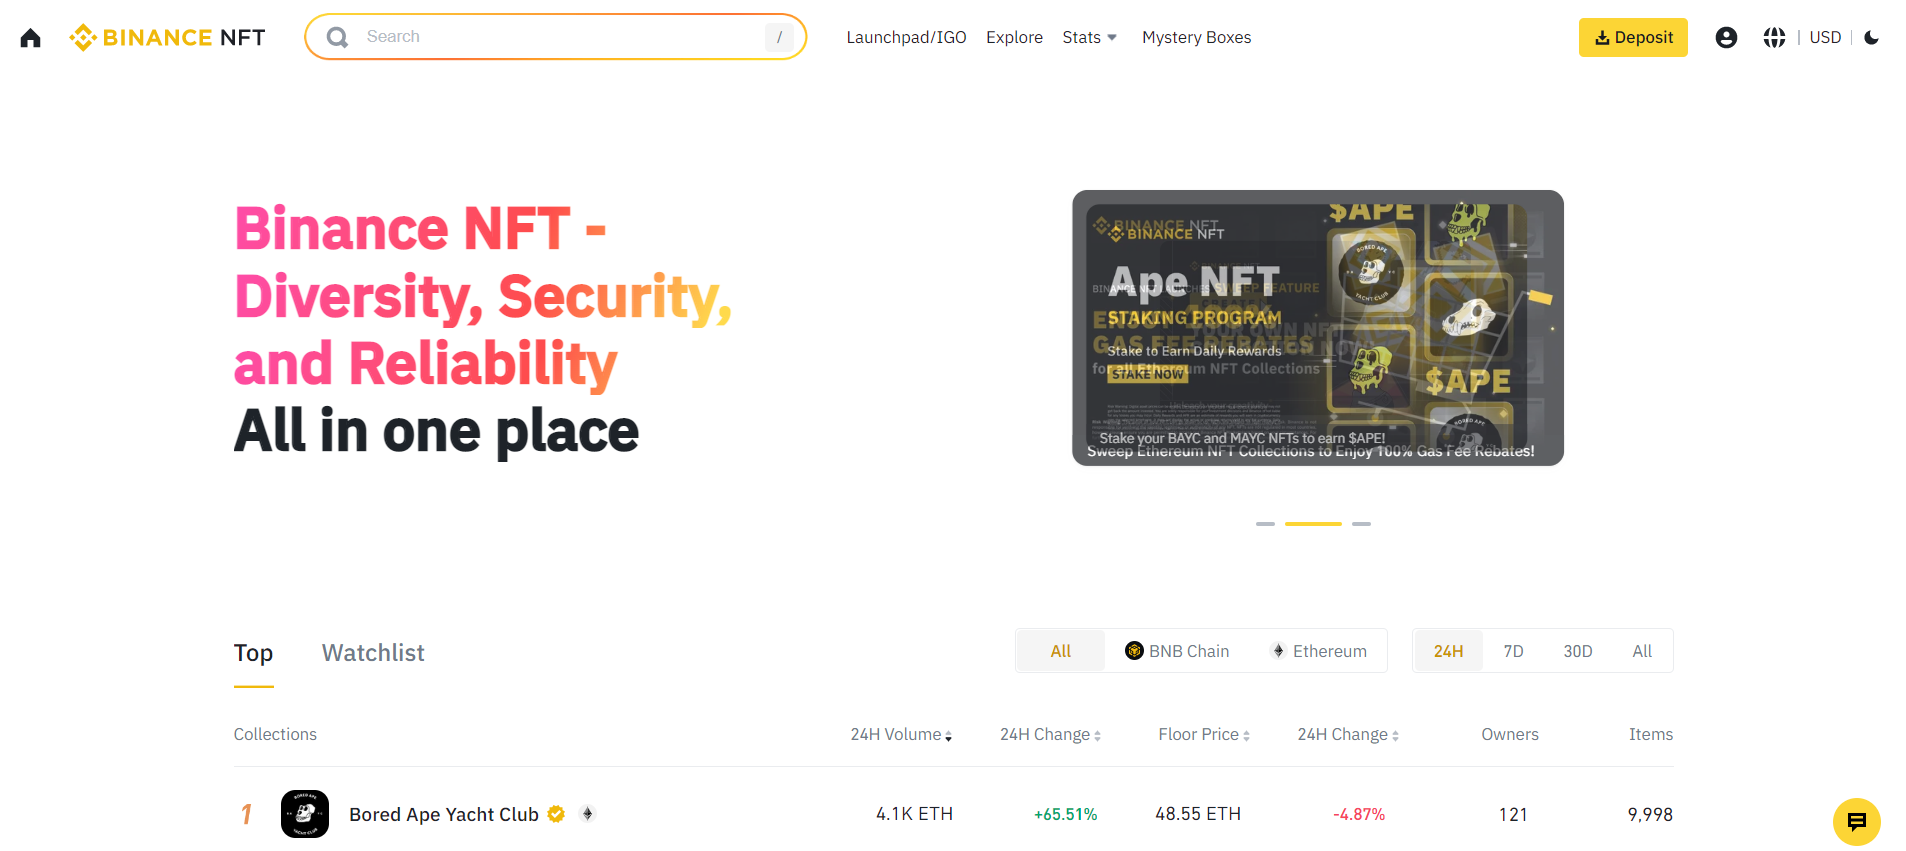 Step 4: Check the NFT trading pair